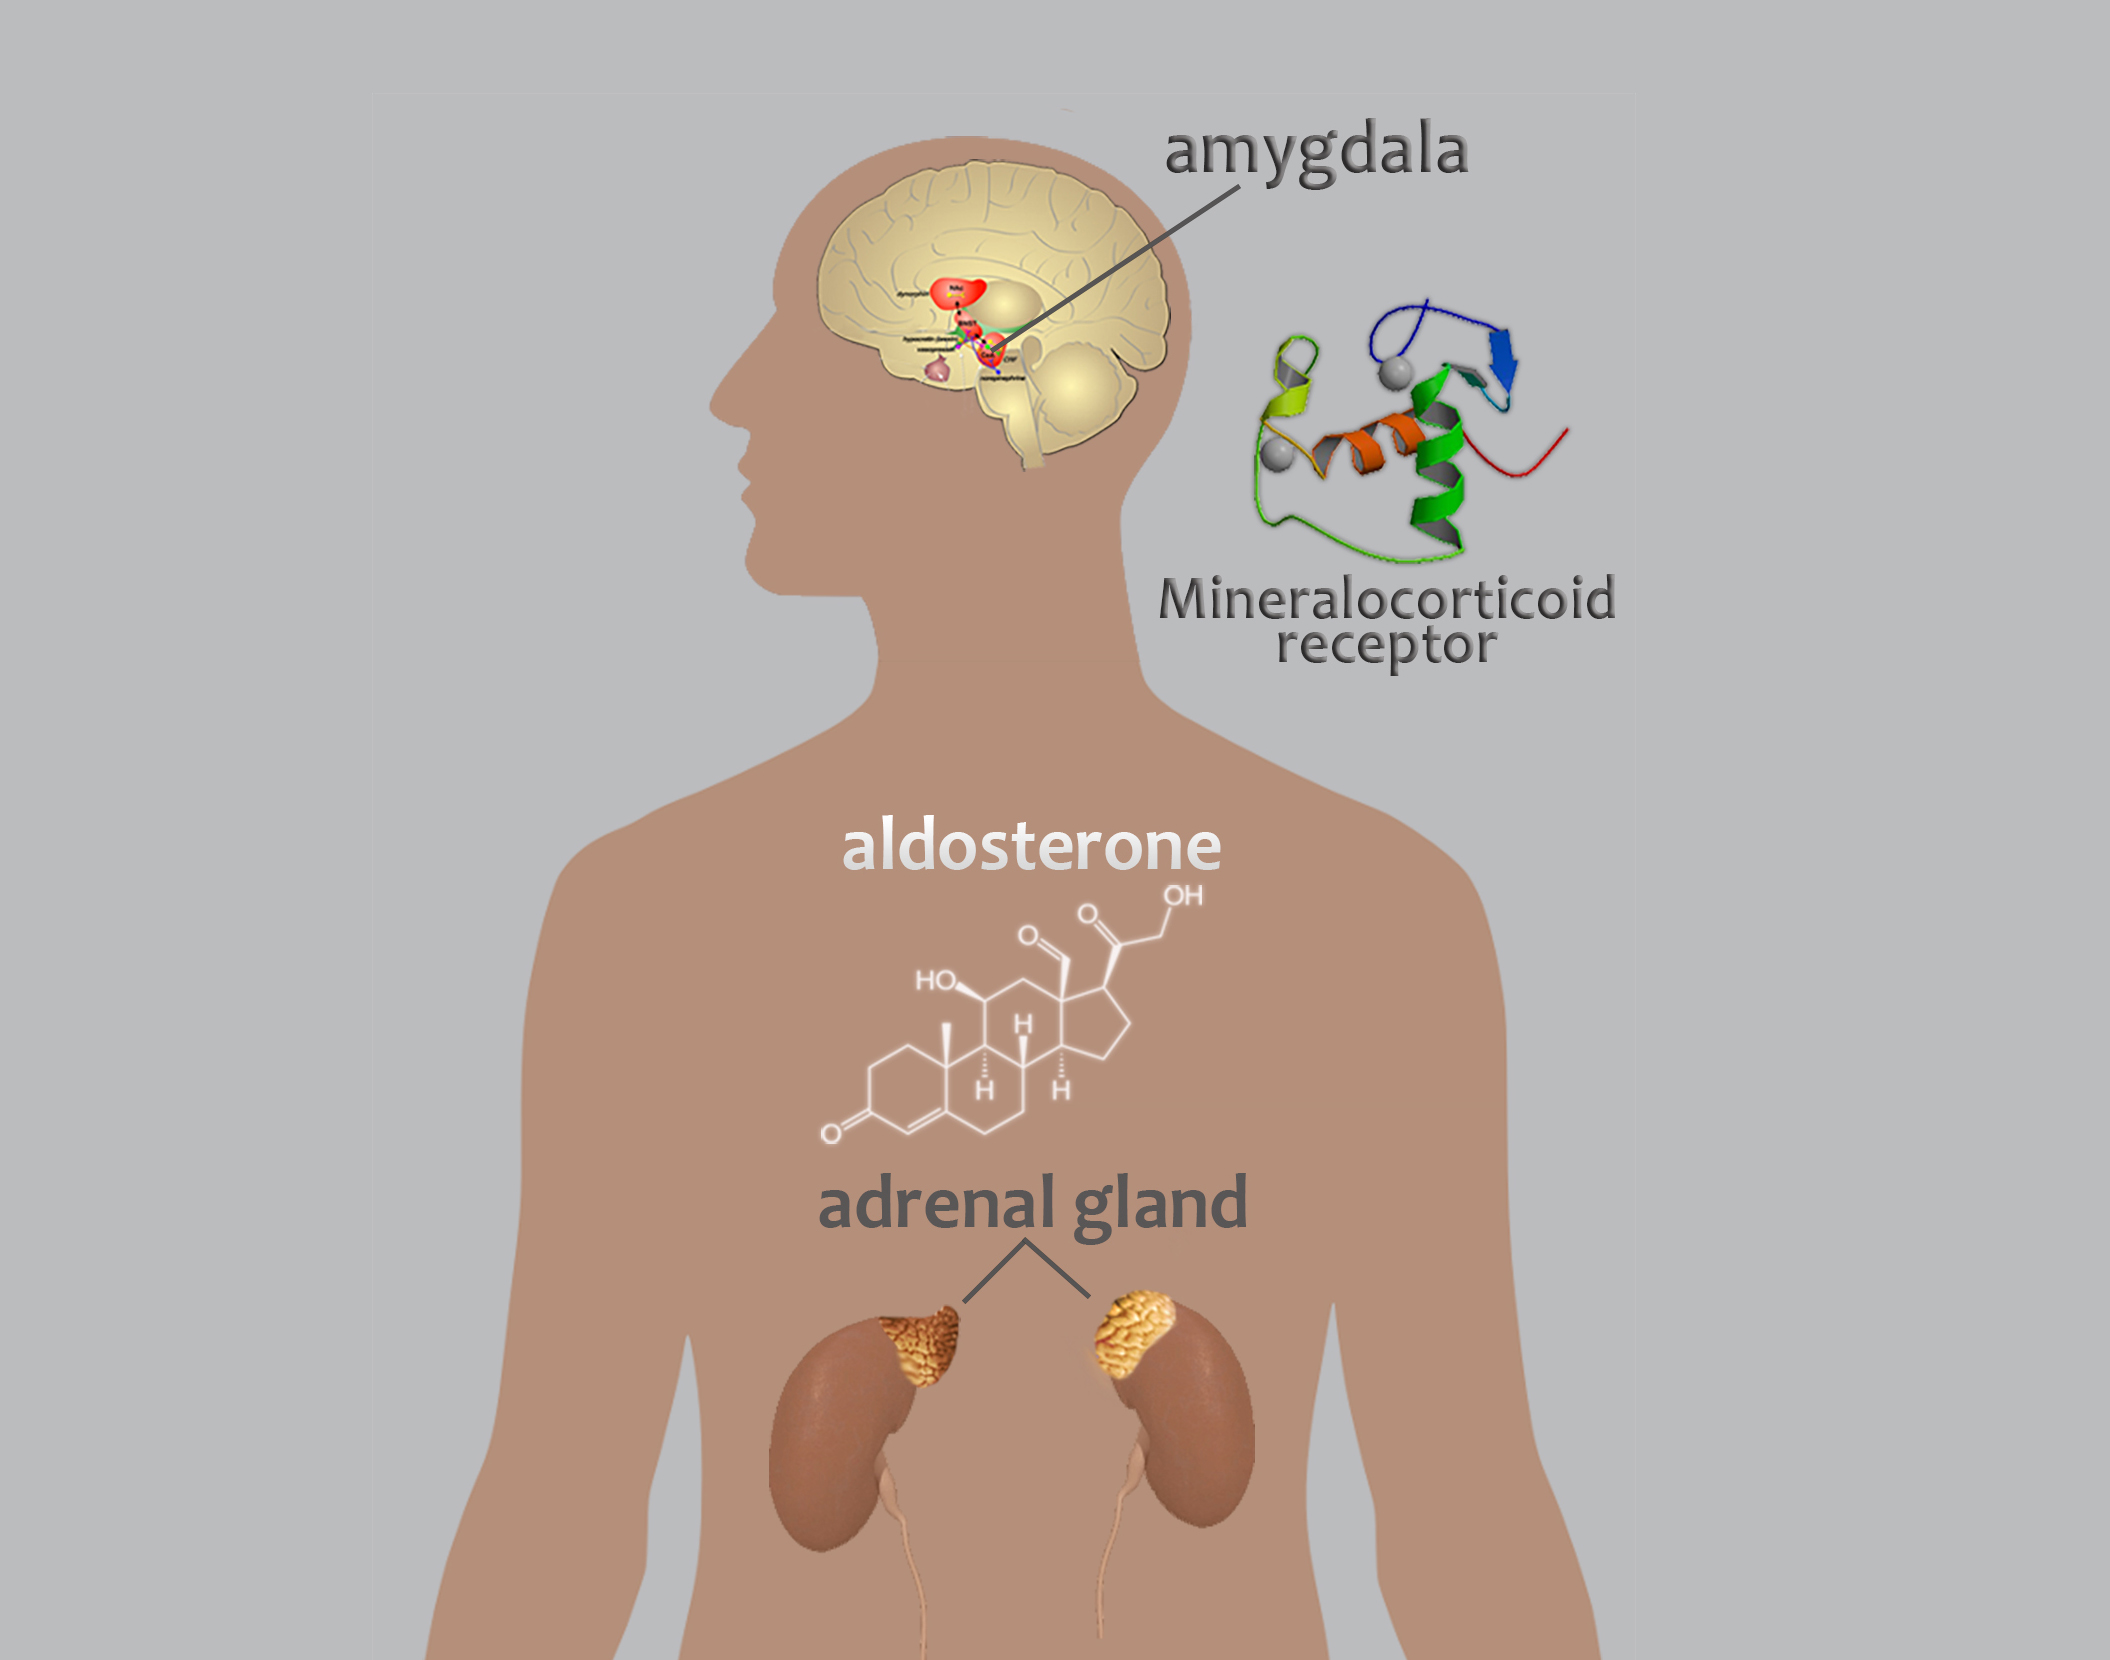 Diagram of adrenal glands, aldosterone structure, and amygdala.